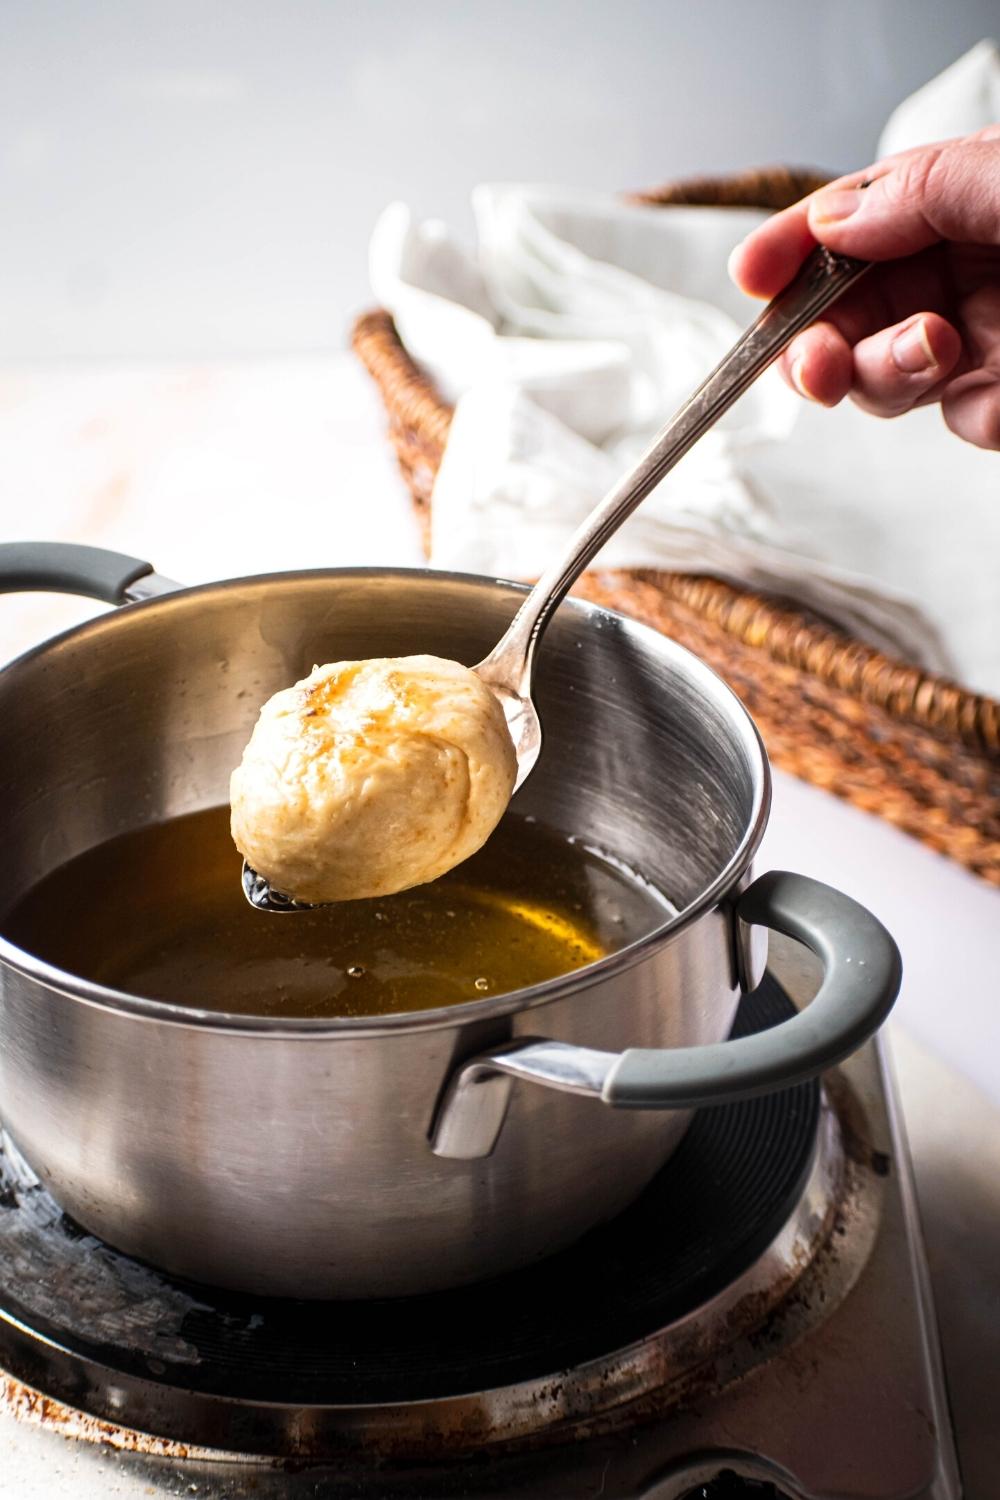 A hand holding a spoon with a fried dumpling on top of it over a pot filled with oil.